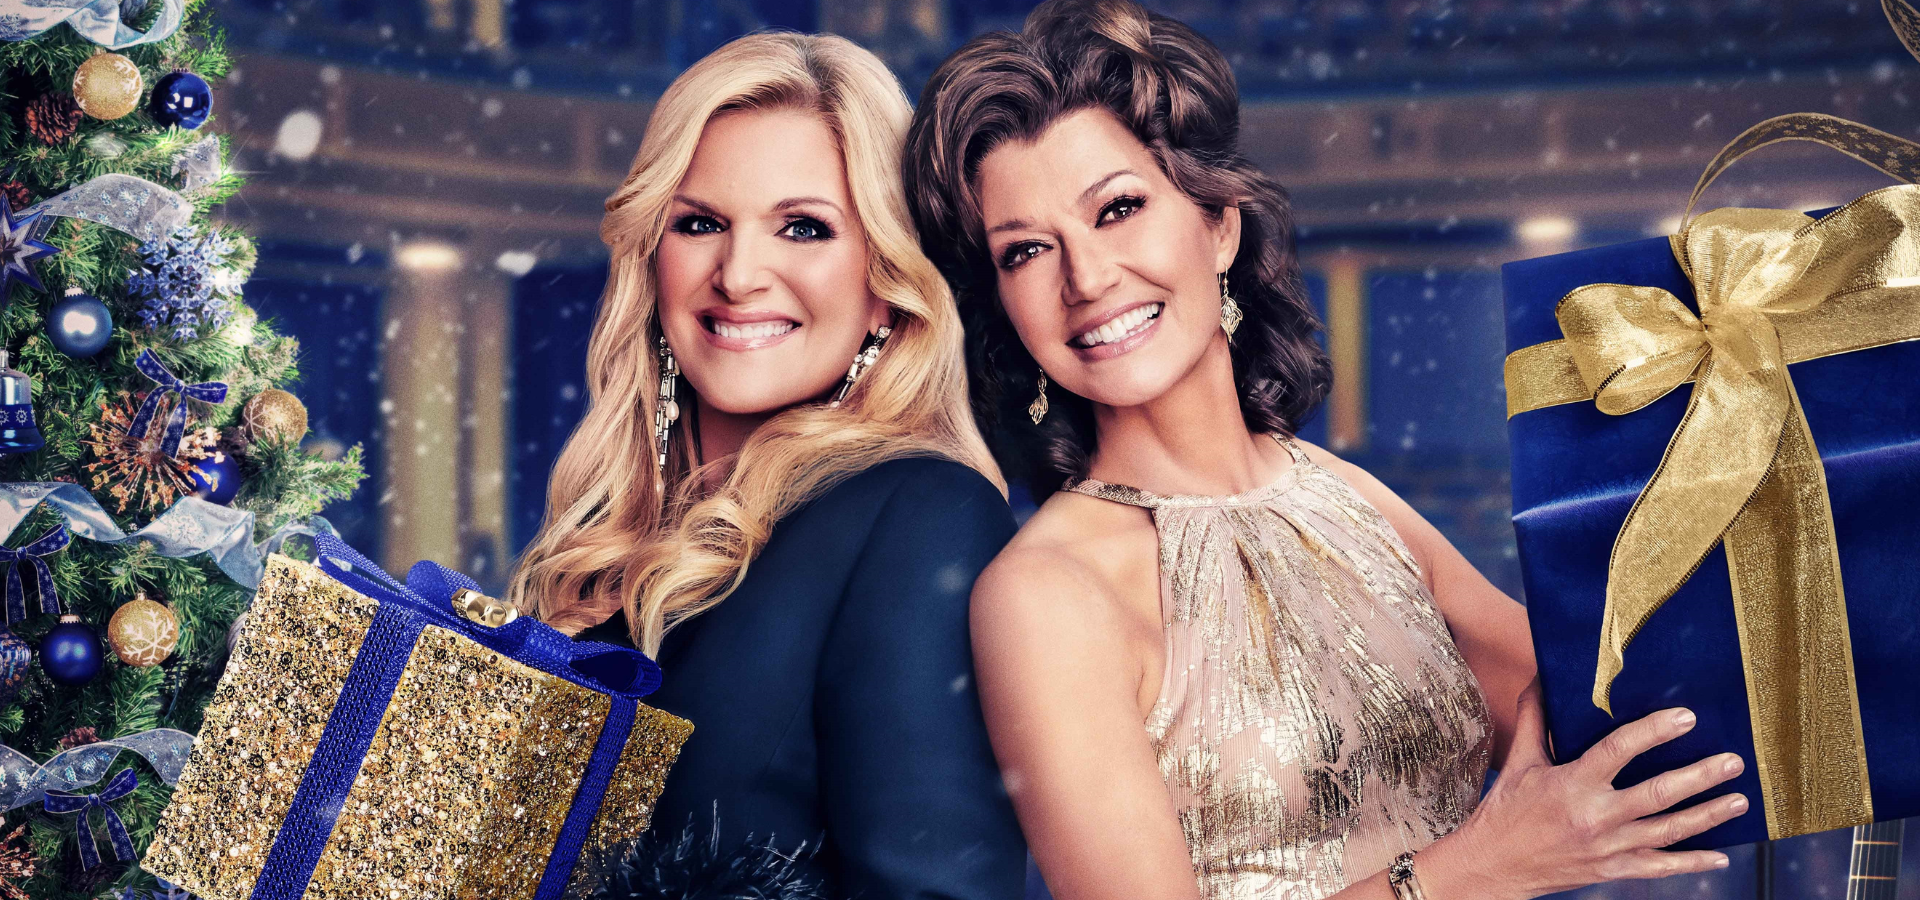 Amy Grant To Co-Host CMA Country Christmas With Trisha Yearwood